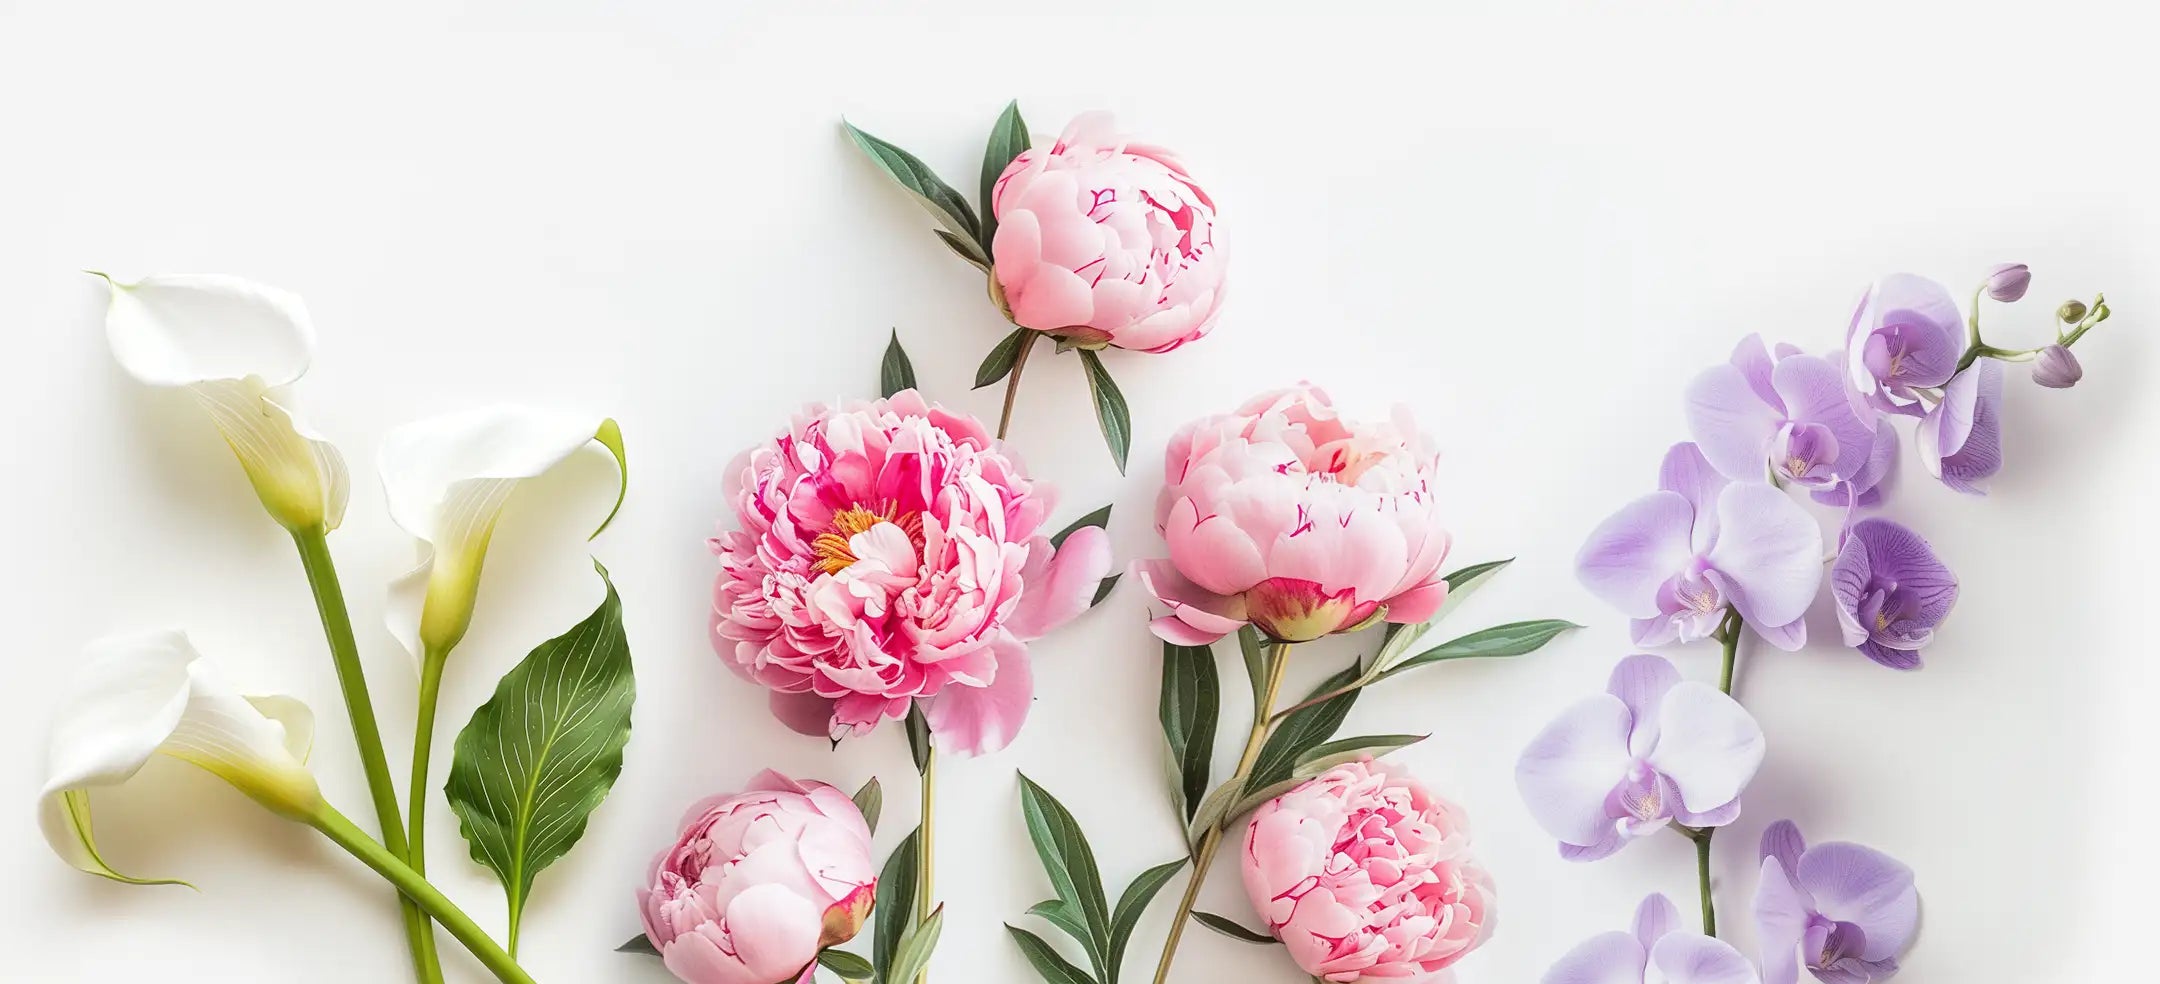 Welcome to the Fabulous Flowers Club banner featuring lush pink peonies and delicate purple orchids, promoting luxury imported blooms delivered to your door. Fabulous Flowers and Gifts.